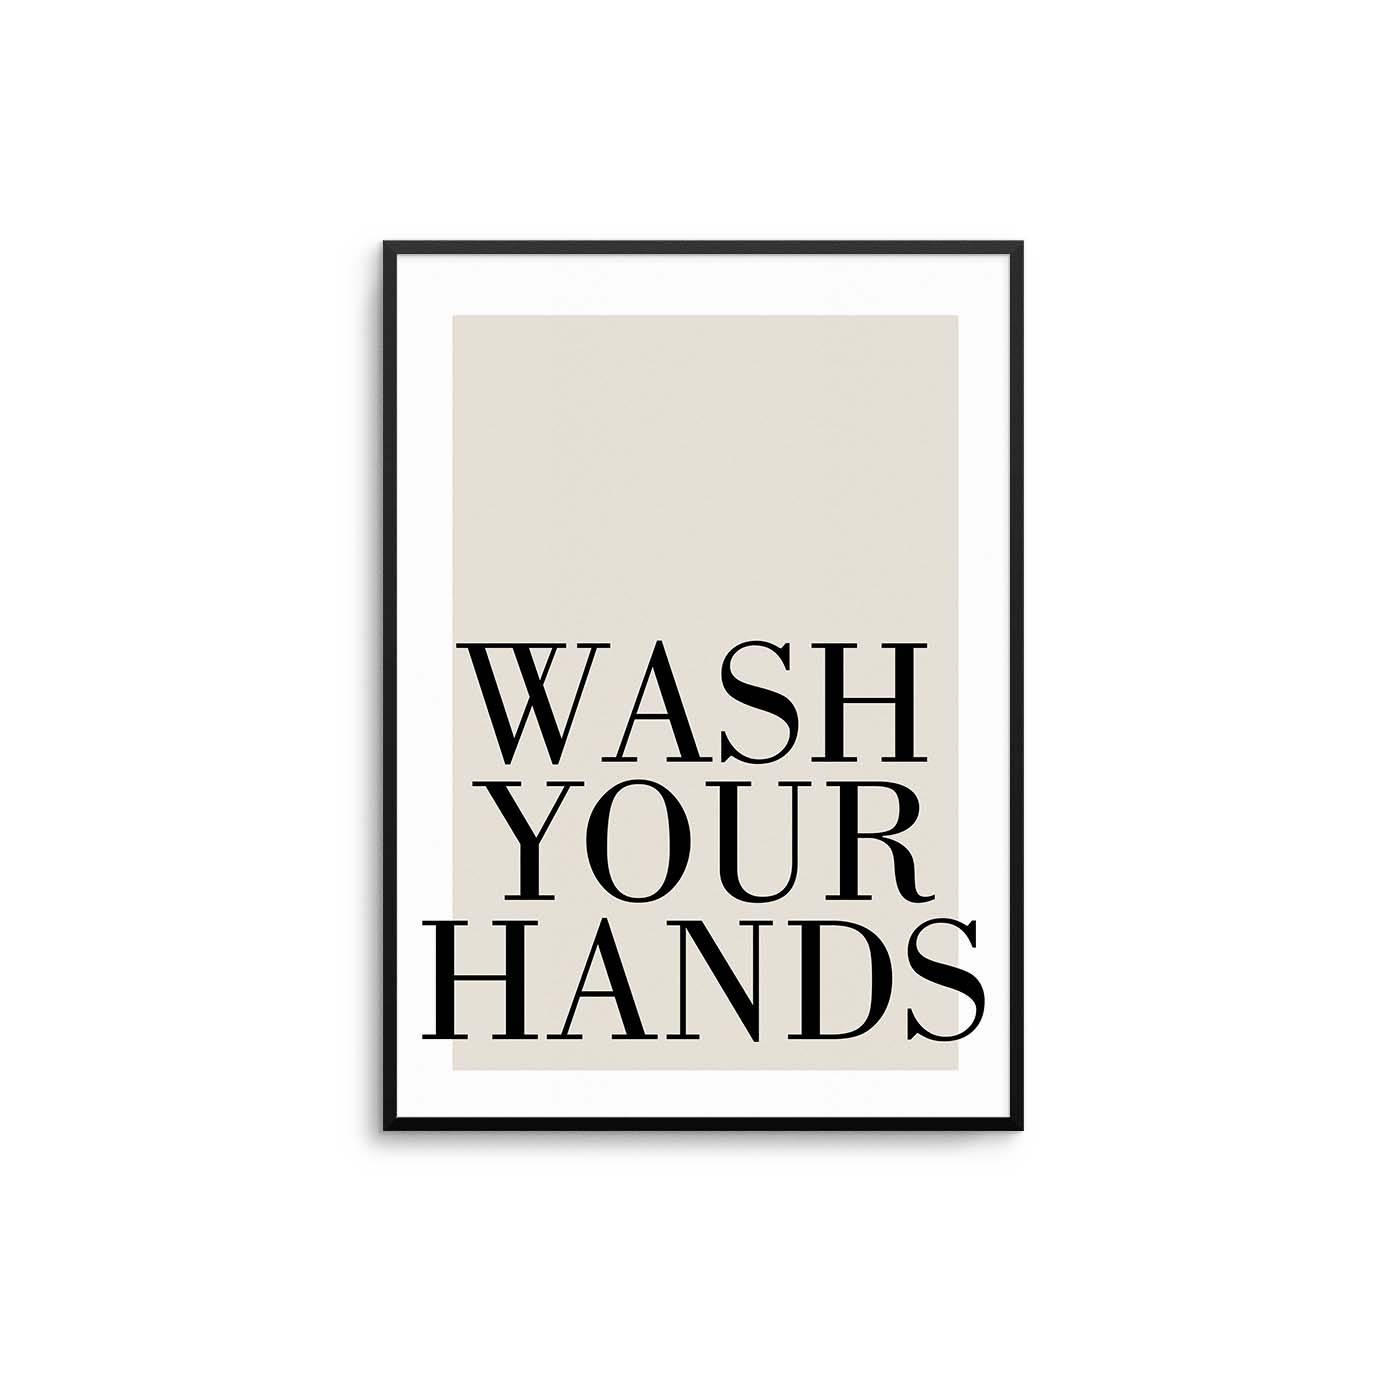 Wash Your Hands Poster - D'Luxe Prints